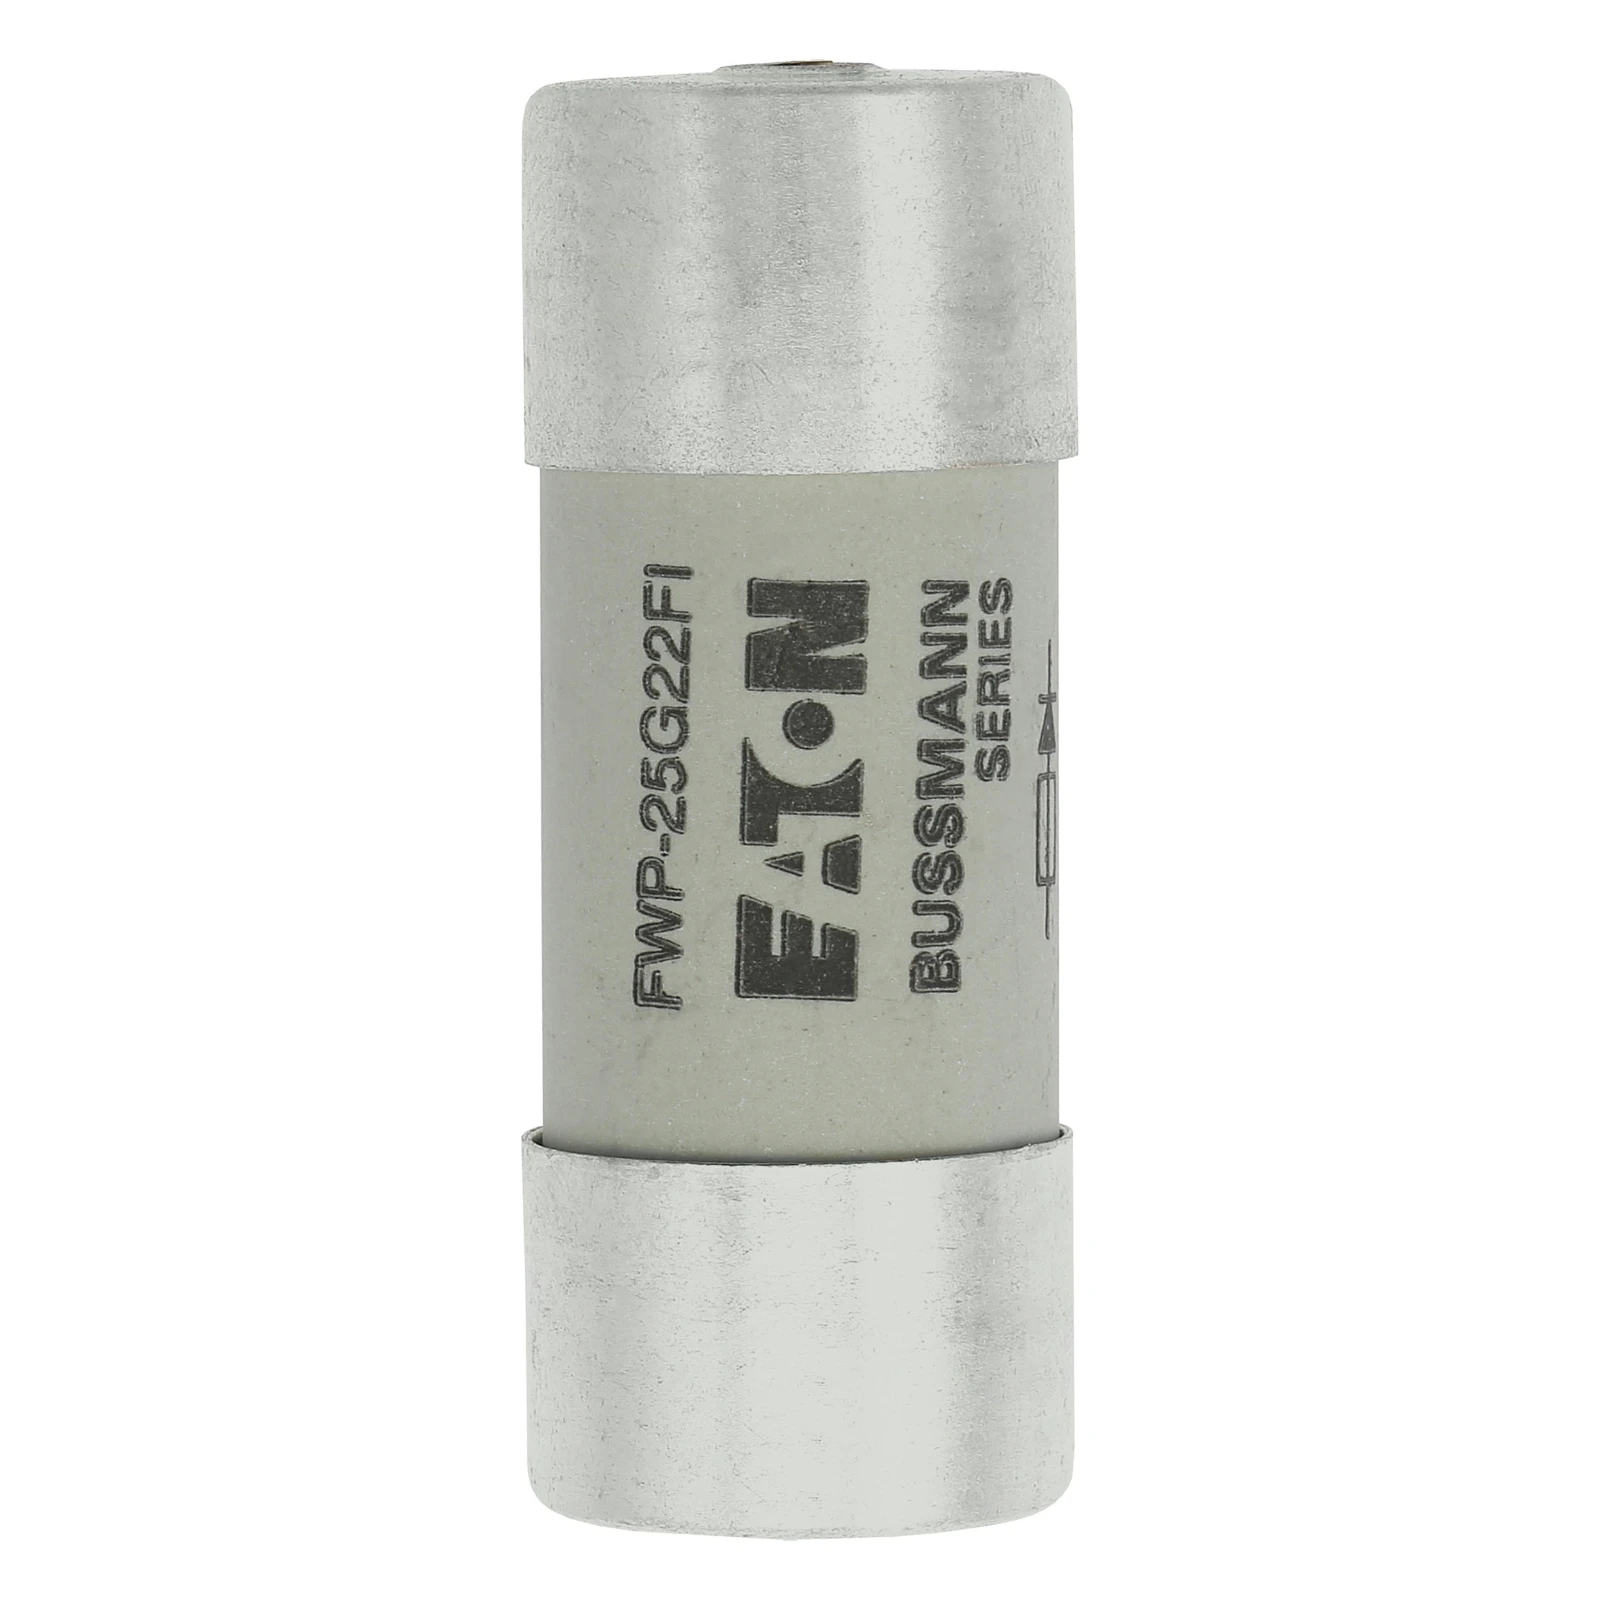 3038665 - Eaton Fuse 25A 690VAC gR 22x58 with Ind